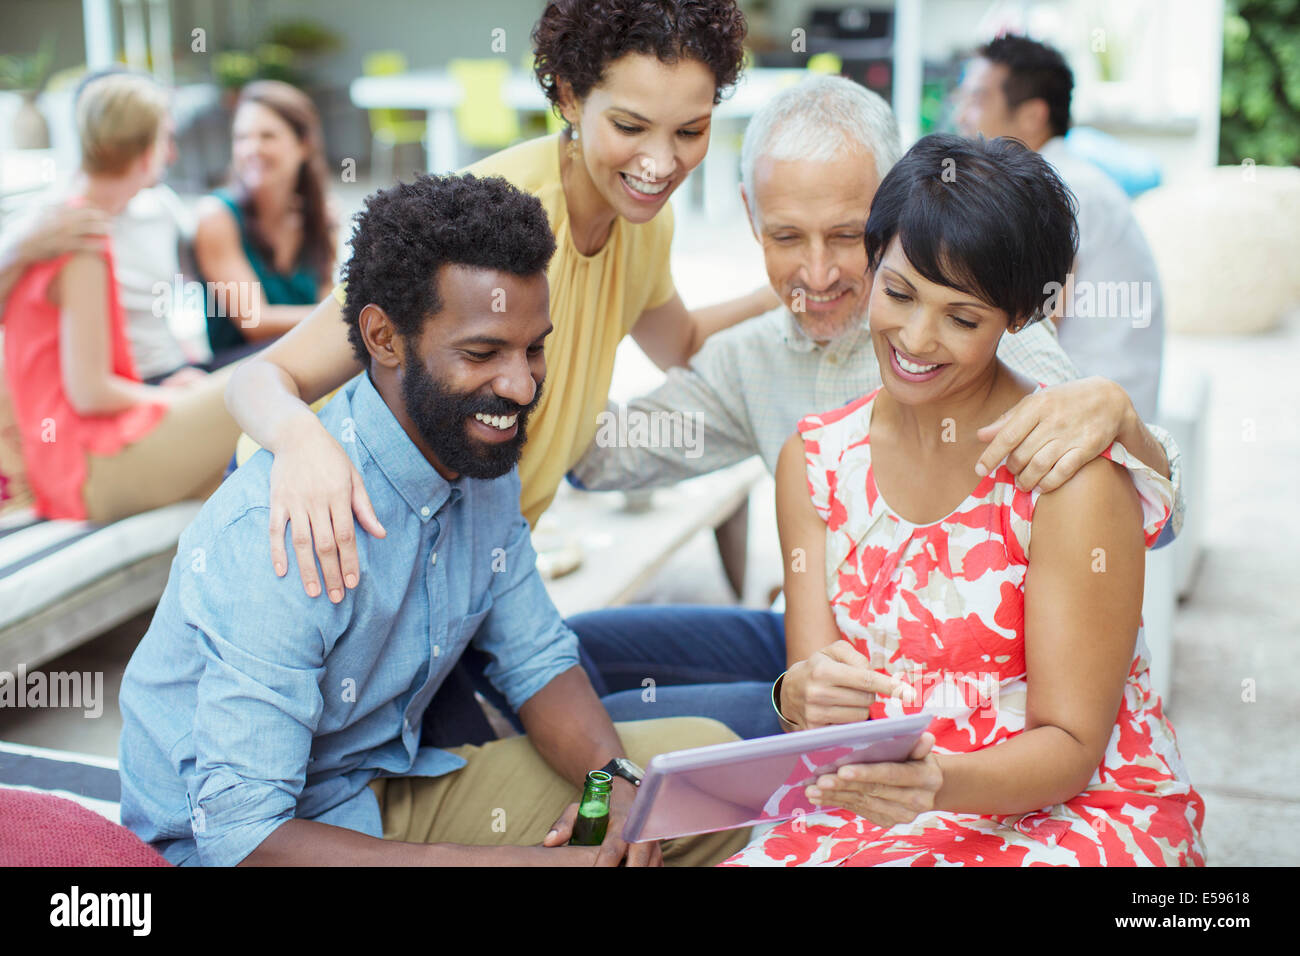 Friends using digital tablet at party Stock Photo